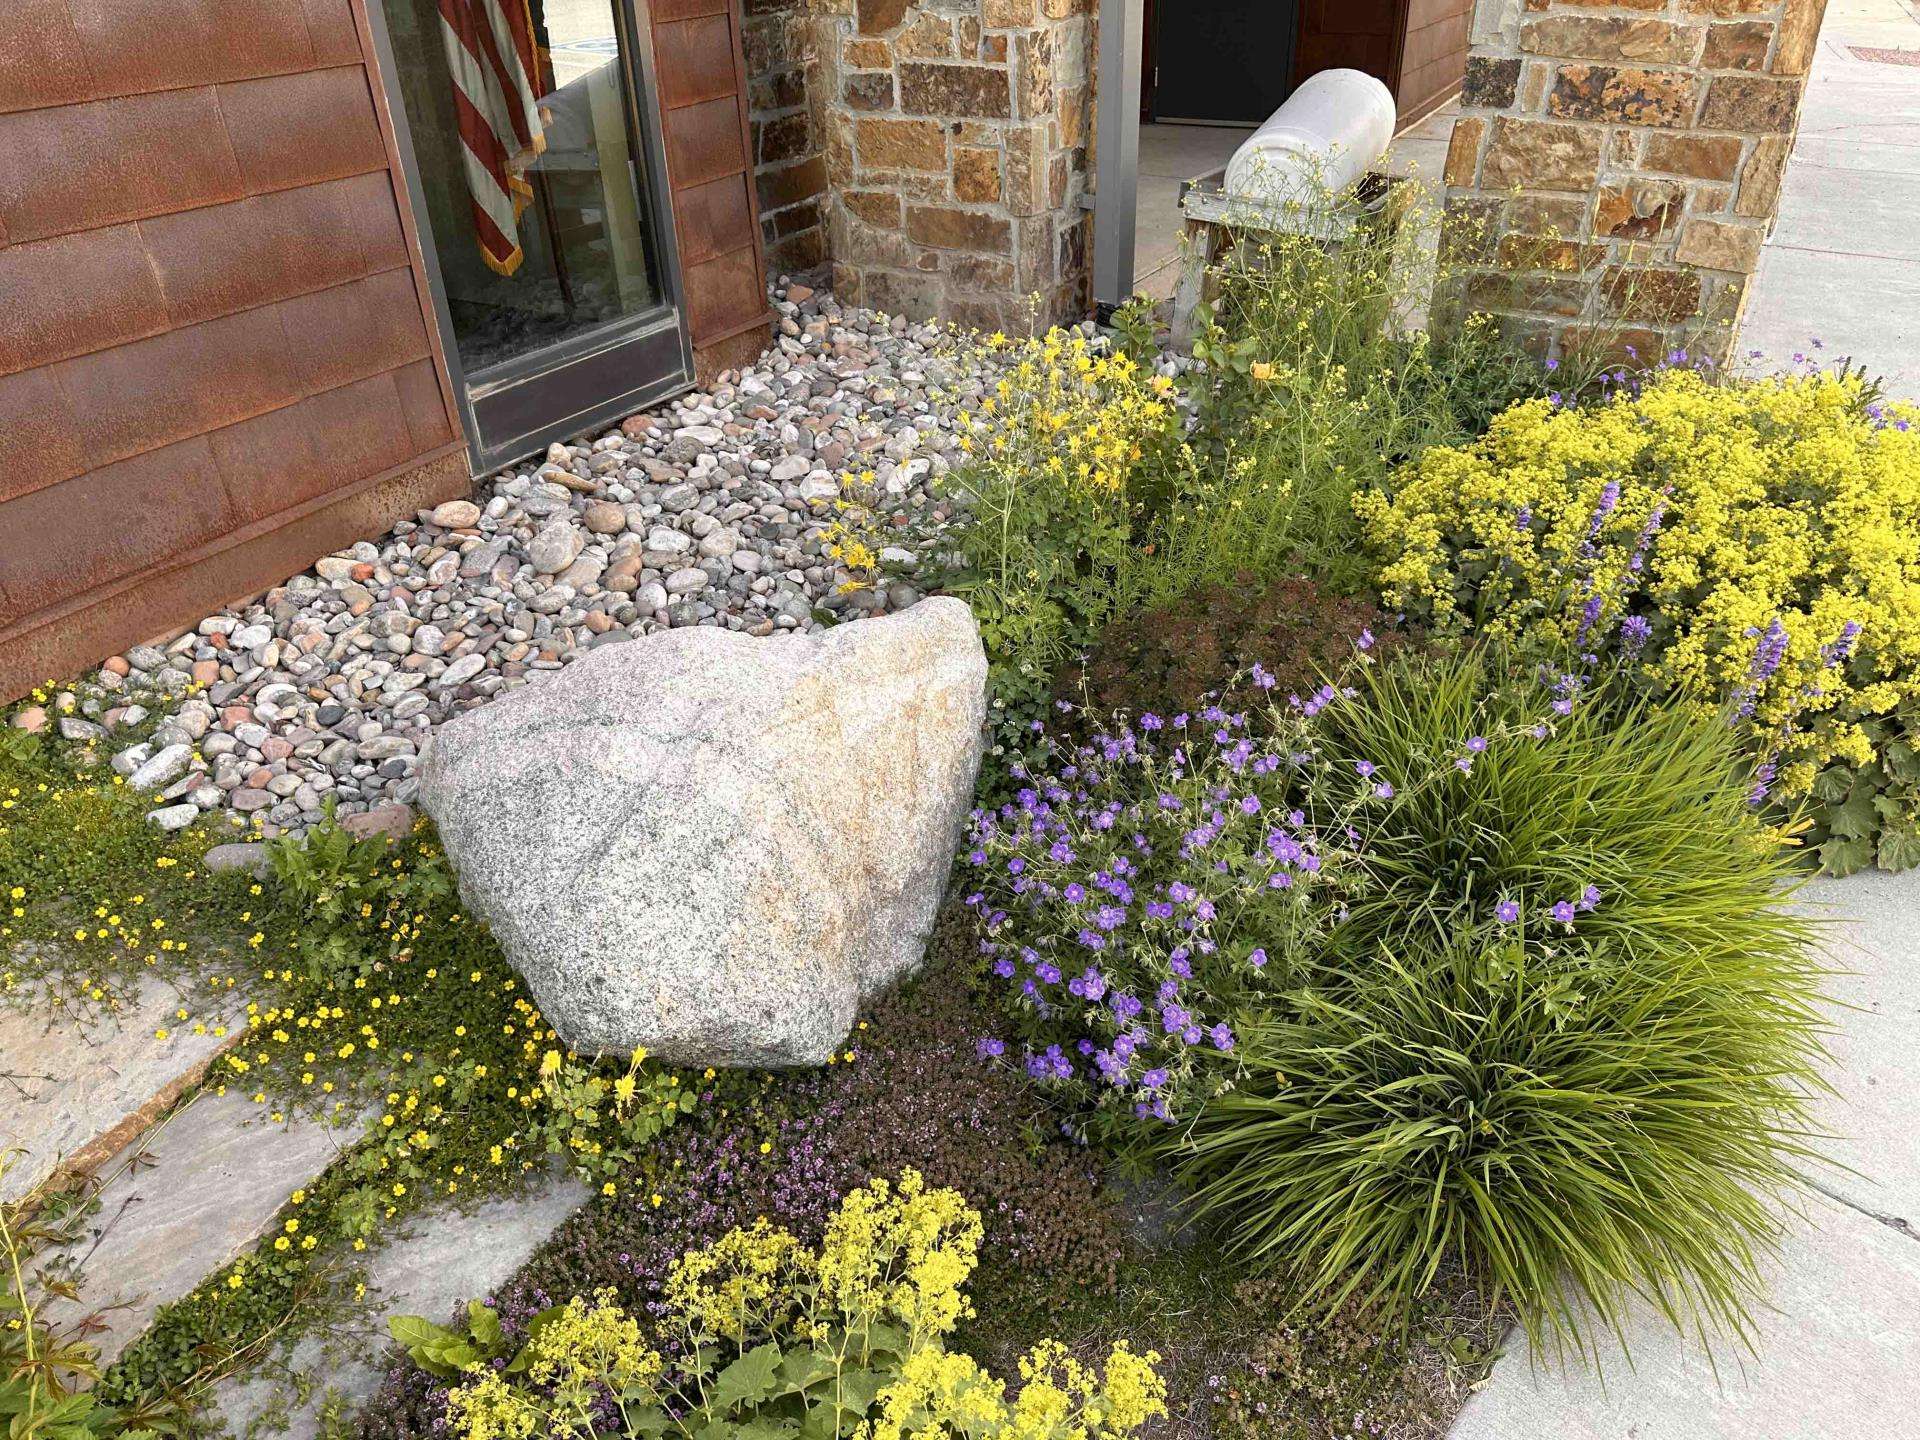 Landscaping example